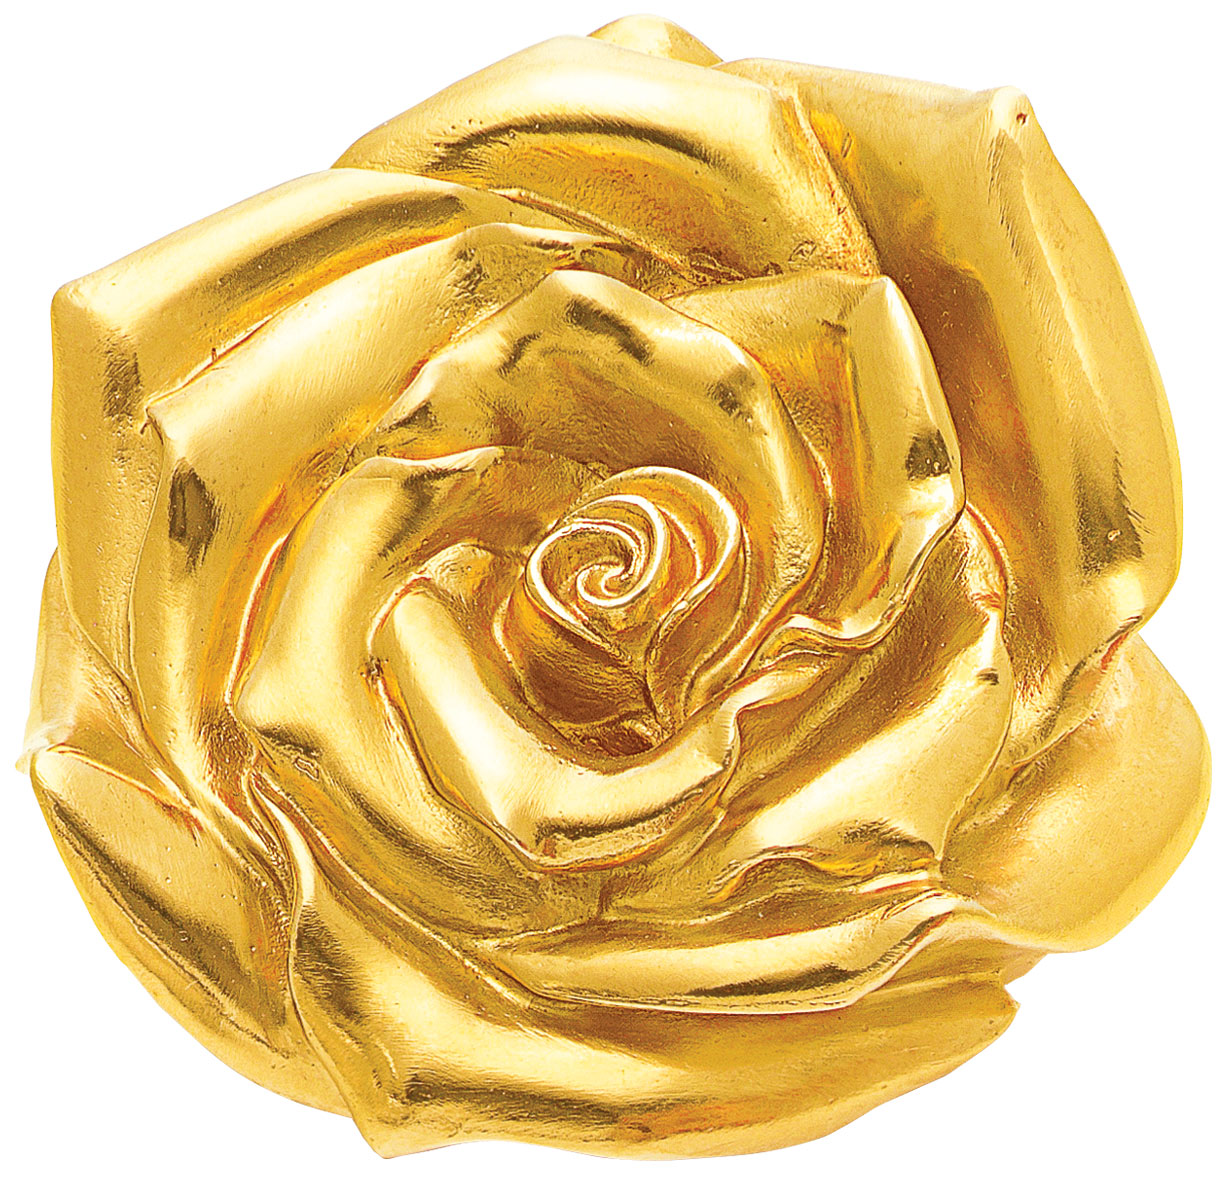 Sculpture "Rose" (2012), yellow gold-plated version by Ottmar Hörl